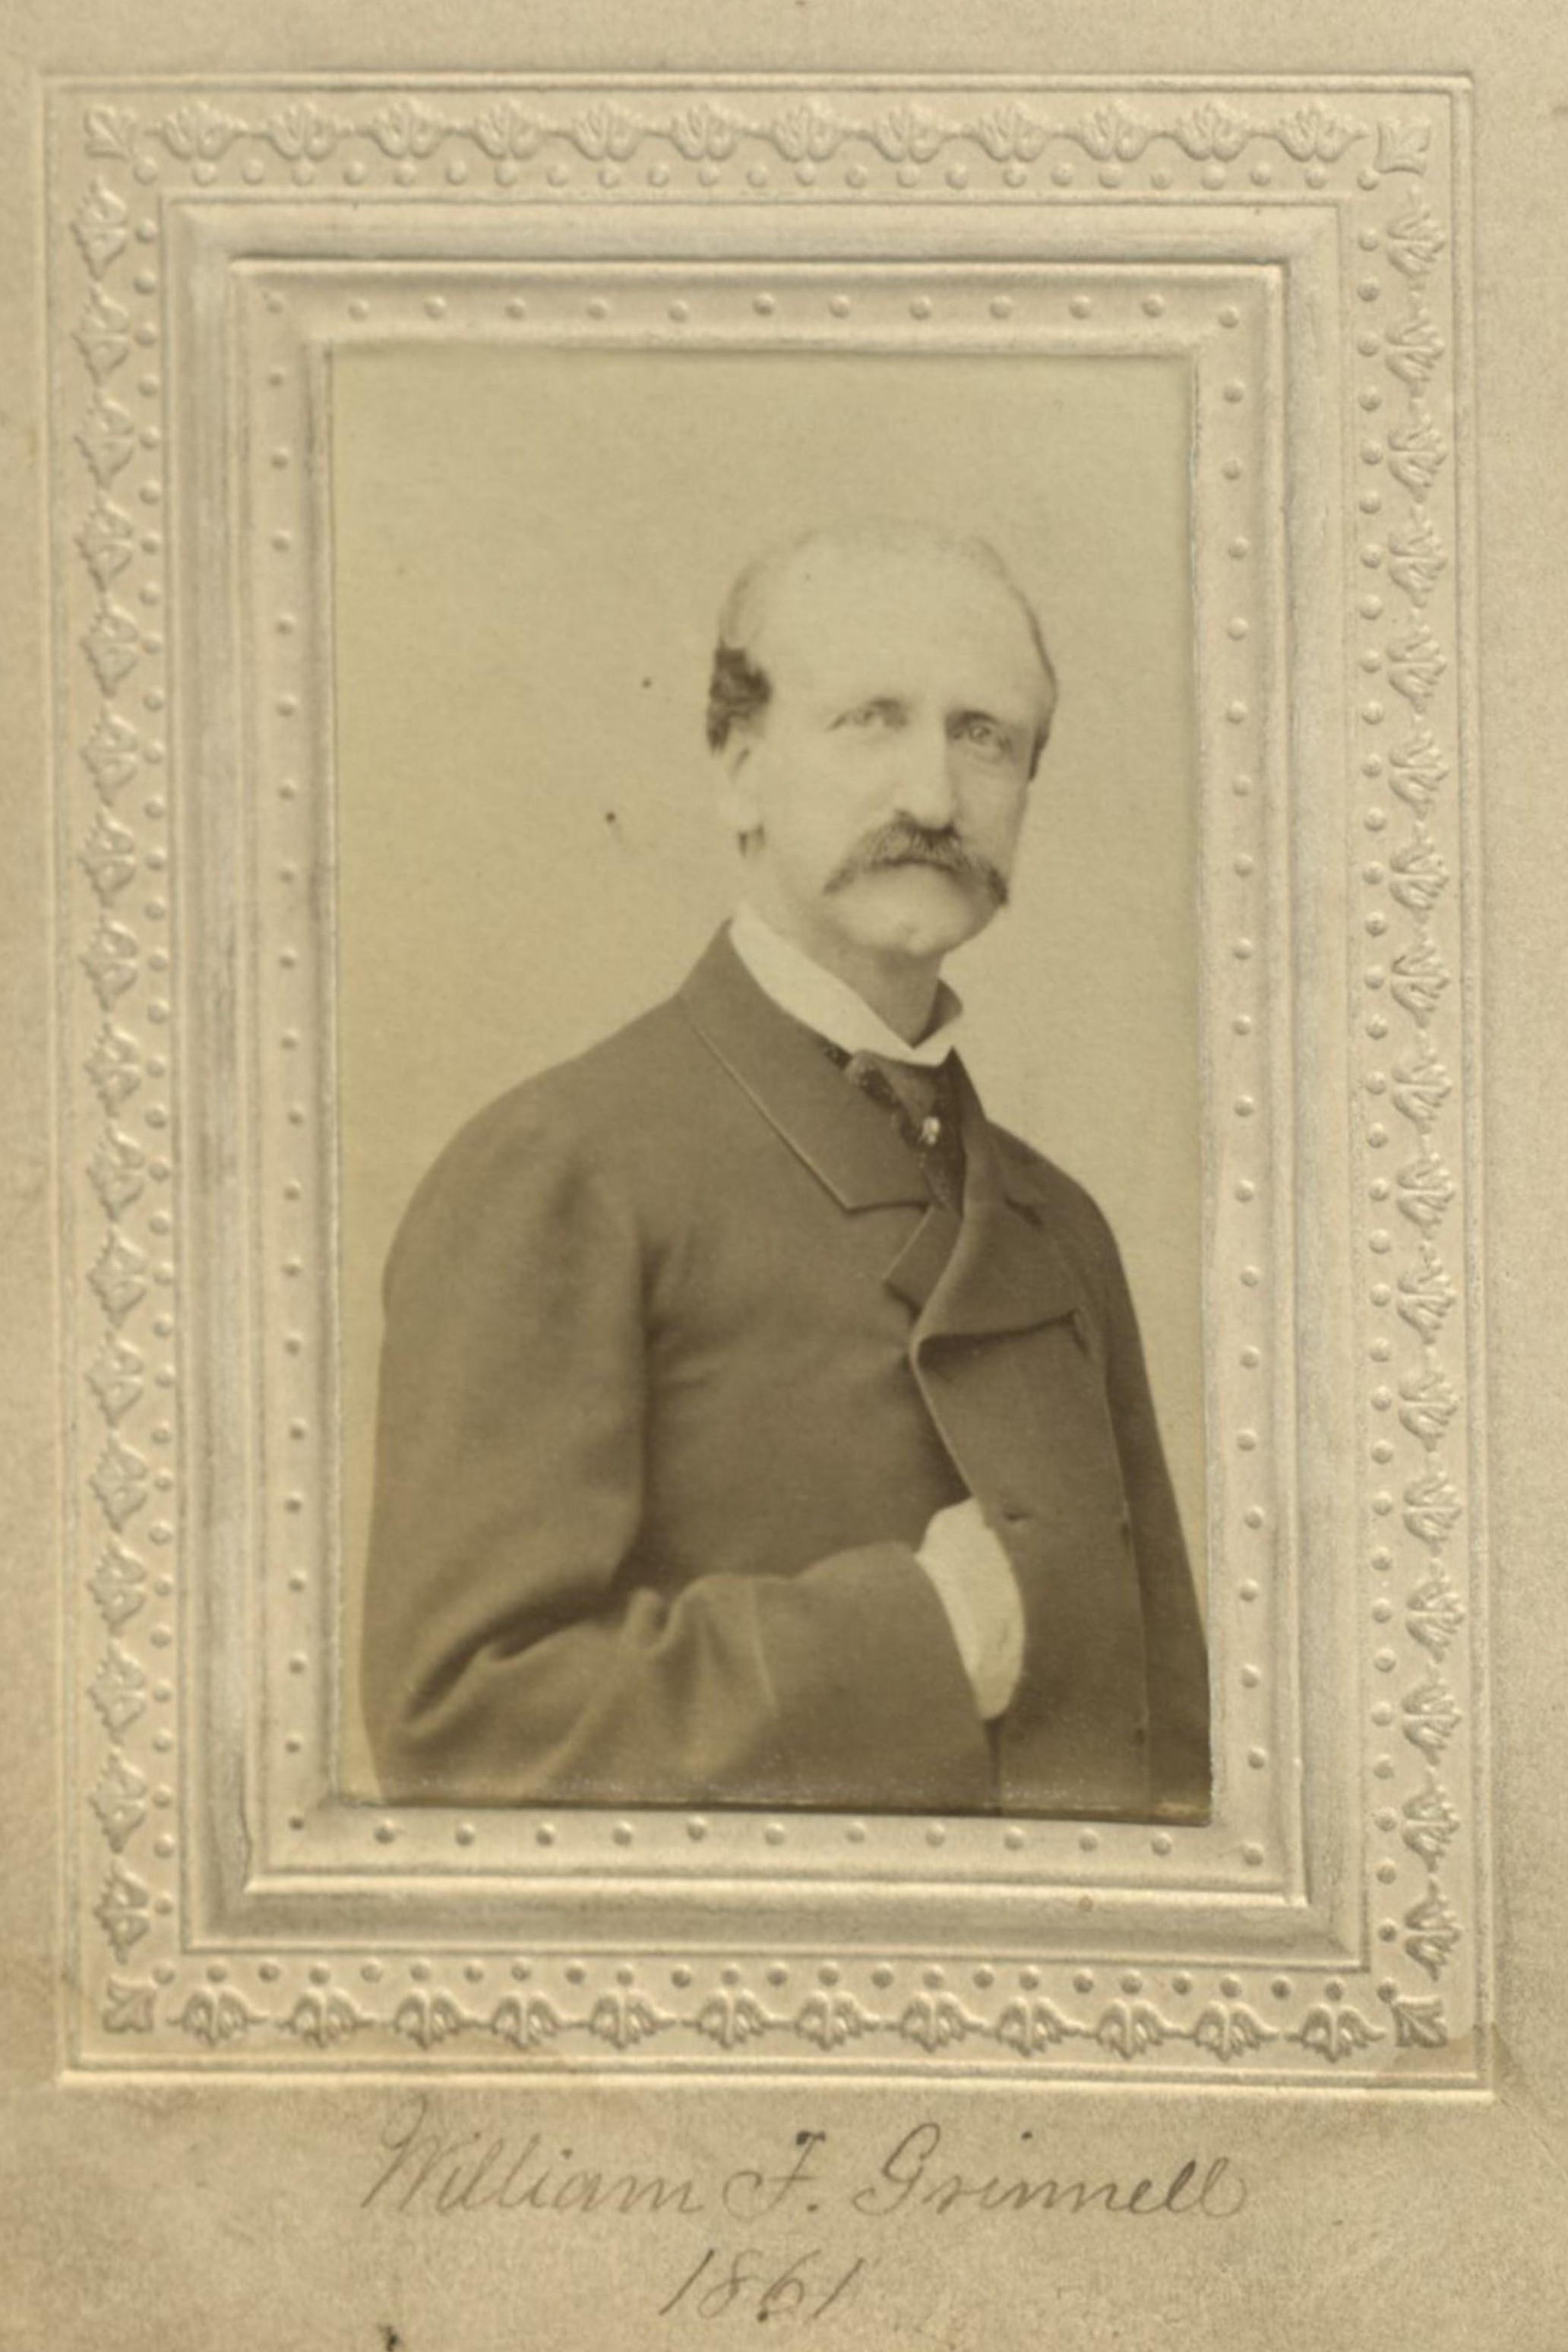 Member portrait of William F. Grinnell